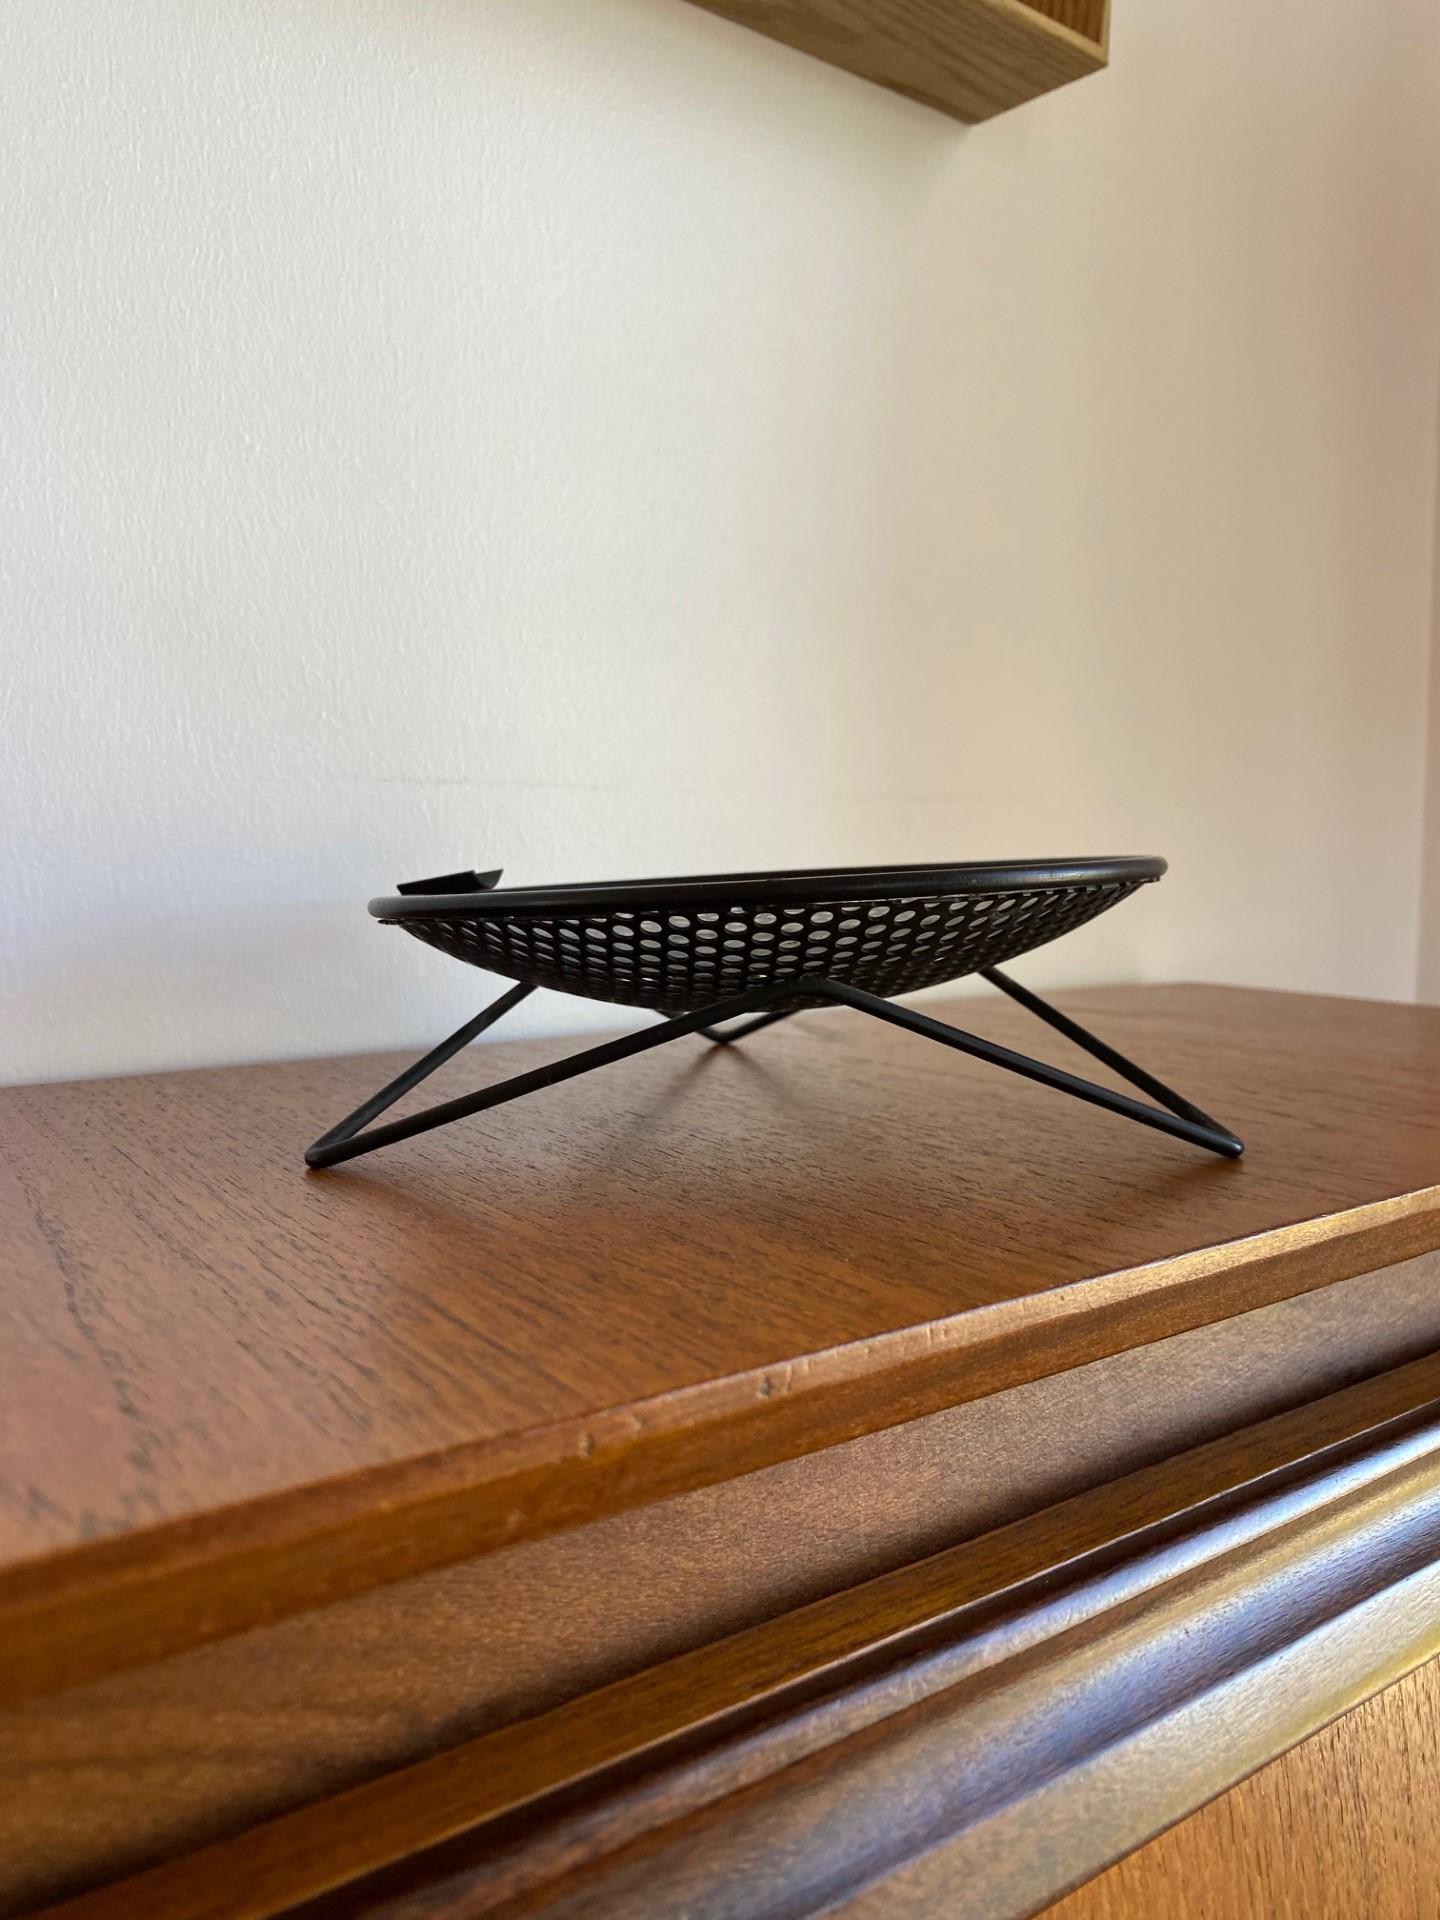 Hand-Crafted 1950s Perforated Metal Mesh Atomic Dish Ashtray Nº S30  Richard Galef Ravenware For Sale